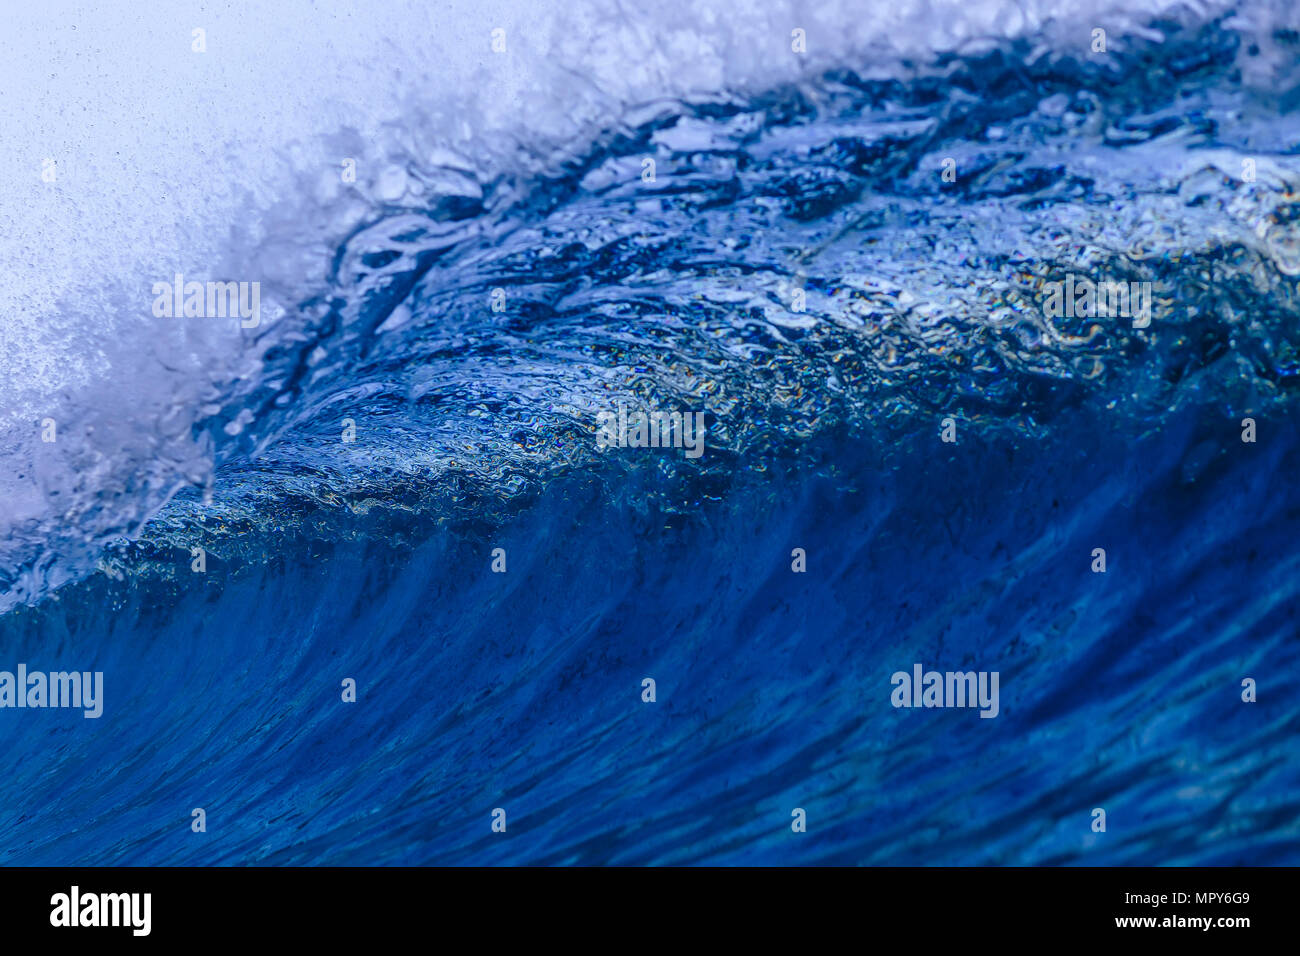 Close-up of waves against sky Stock Photo